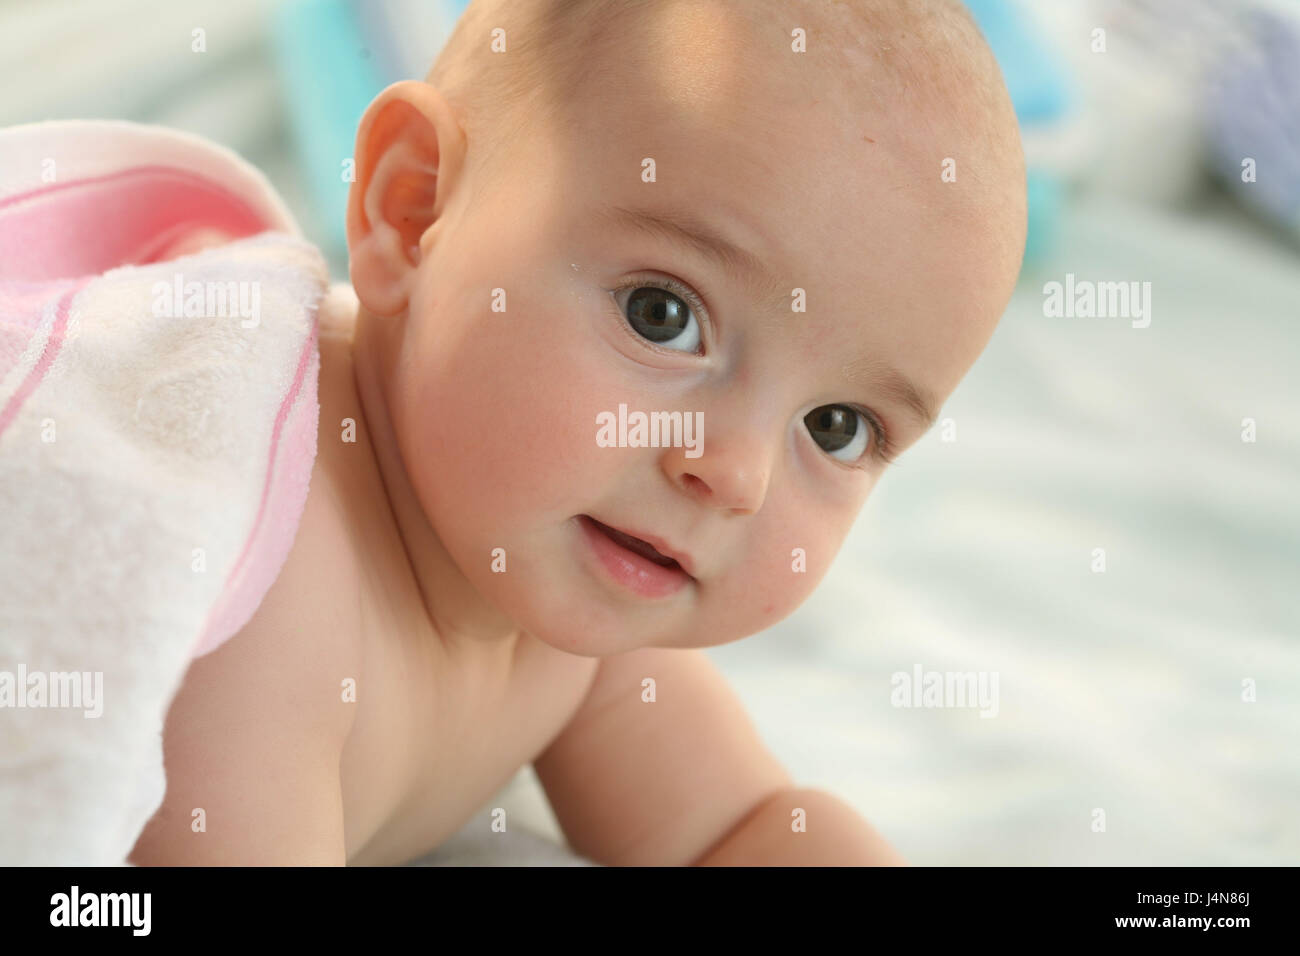 Baby, 4 months, portrait, curled, Stock Photo